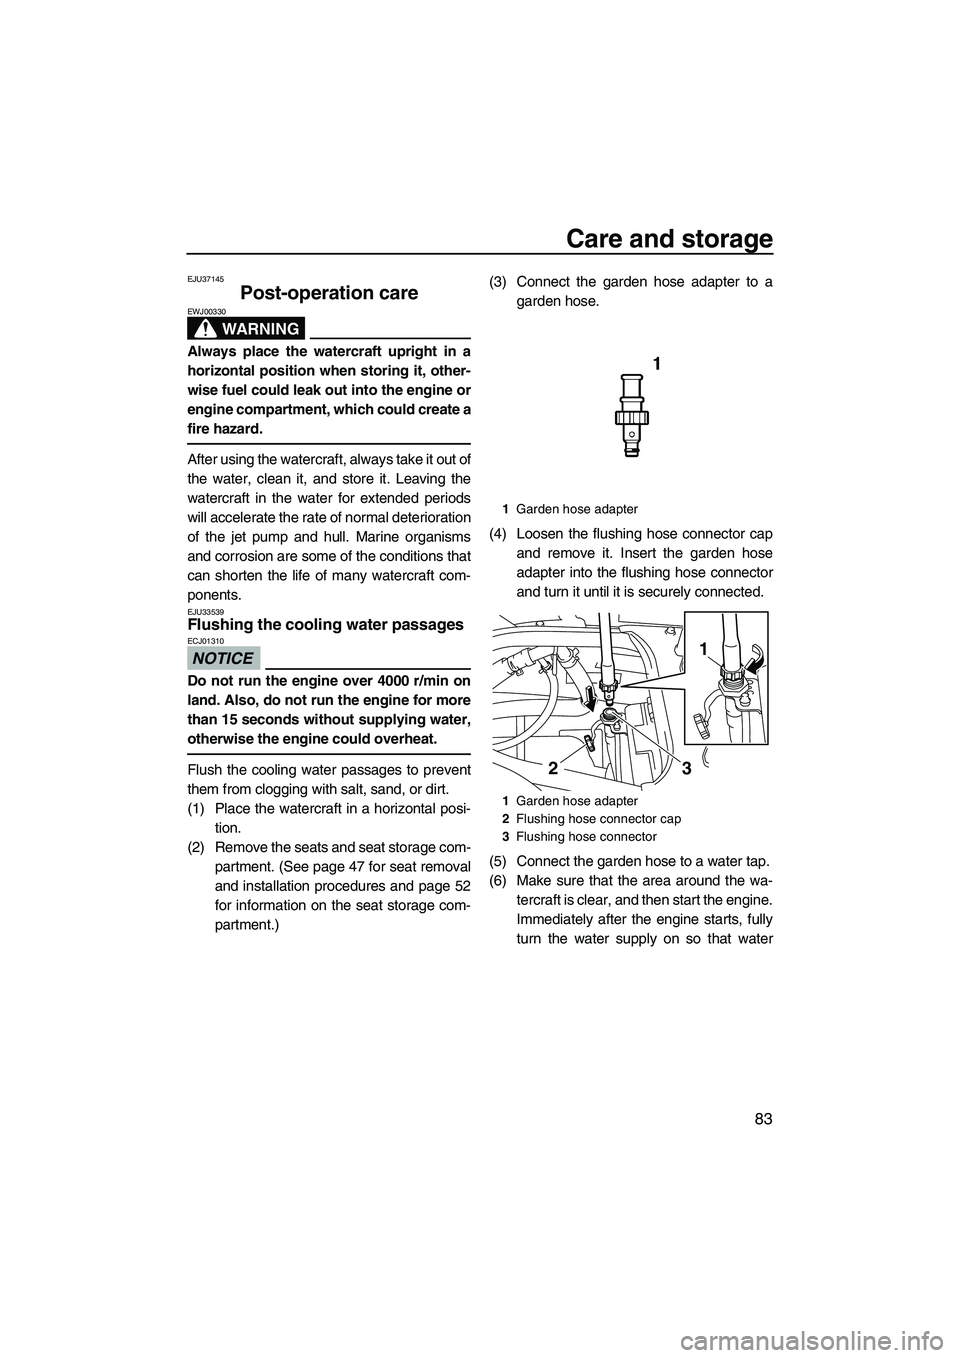 YAMAHA SVHO 2011  Owners Manual Care and storage
83
EJU37145
Post-operation care 
WARNING
EWJ00330
Always place the watercraft upright in a
horizontal position when storing it, other-
wise fuel could leak out into the engine or
engi